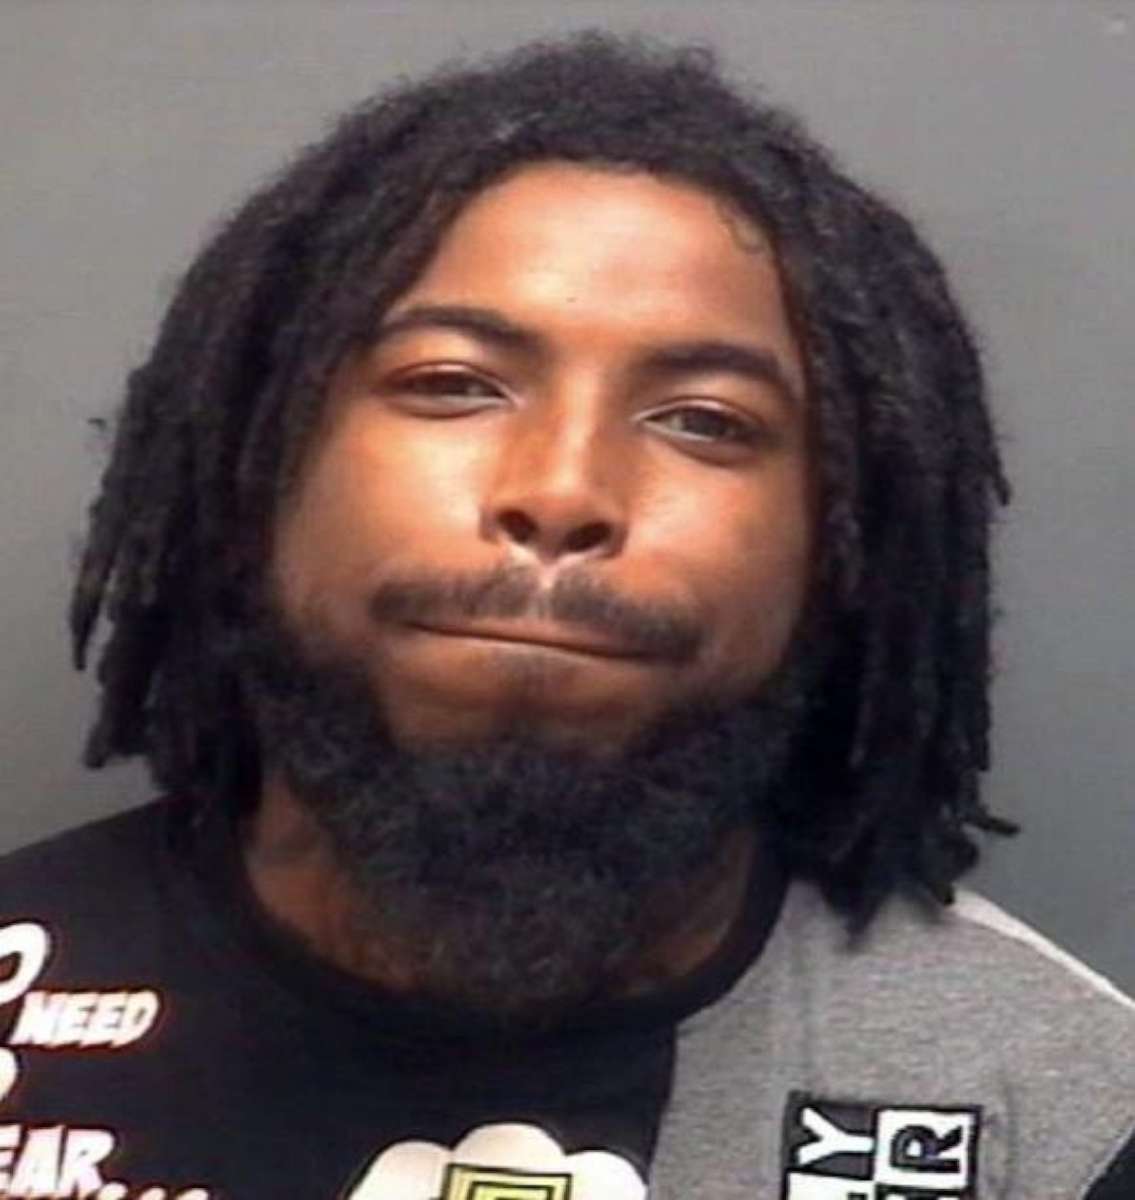 PHOTO: Davonte T. Strickland, 25, of High Point, North Carolina, was arrested on July 13 and accused of being involved in the death a teenage boy who was shot and killed after the alleged gunman thought the victim was “tampering” with his car.